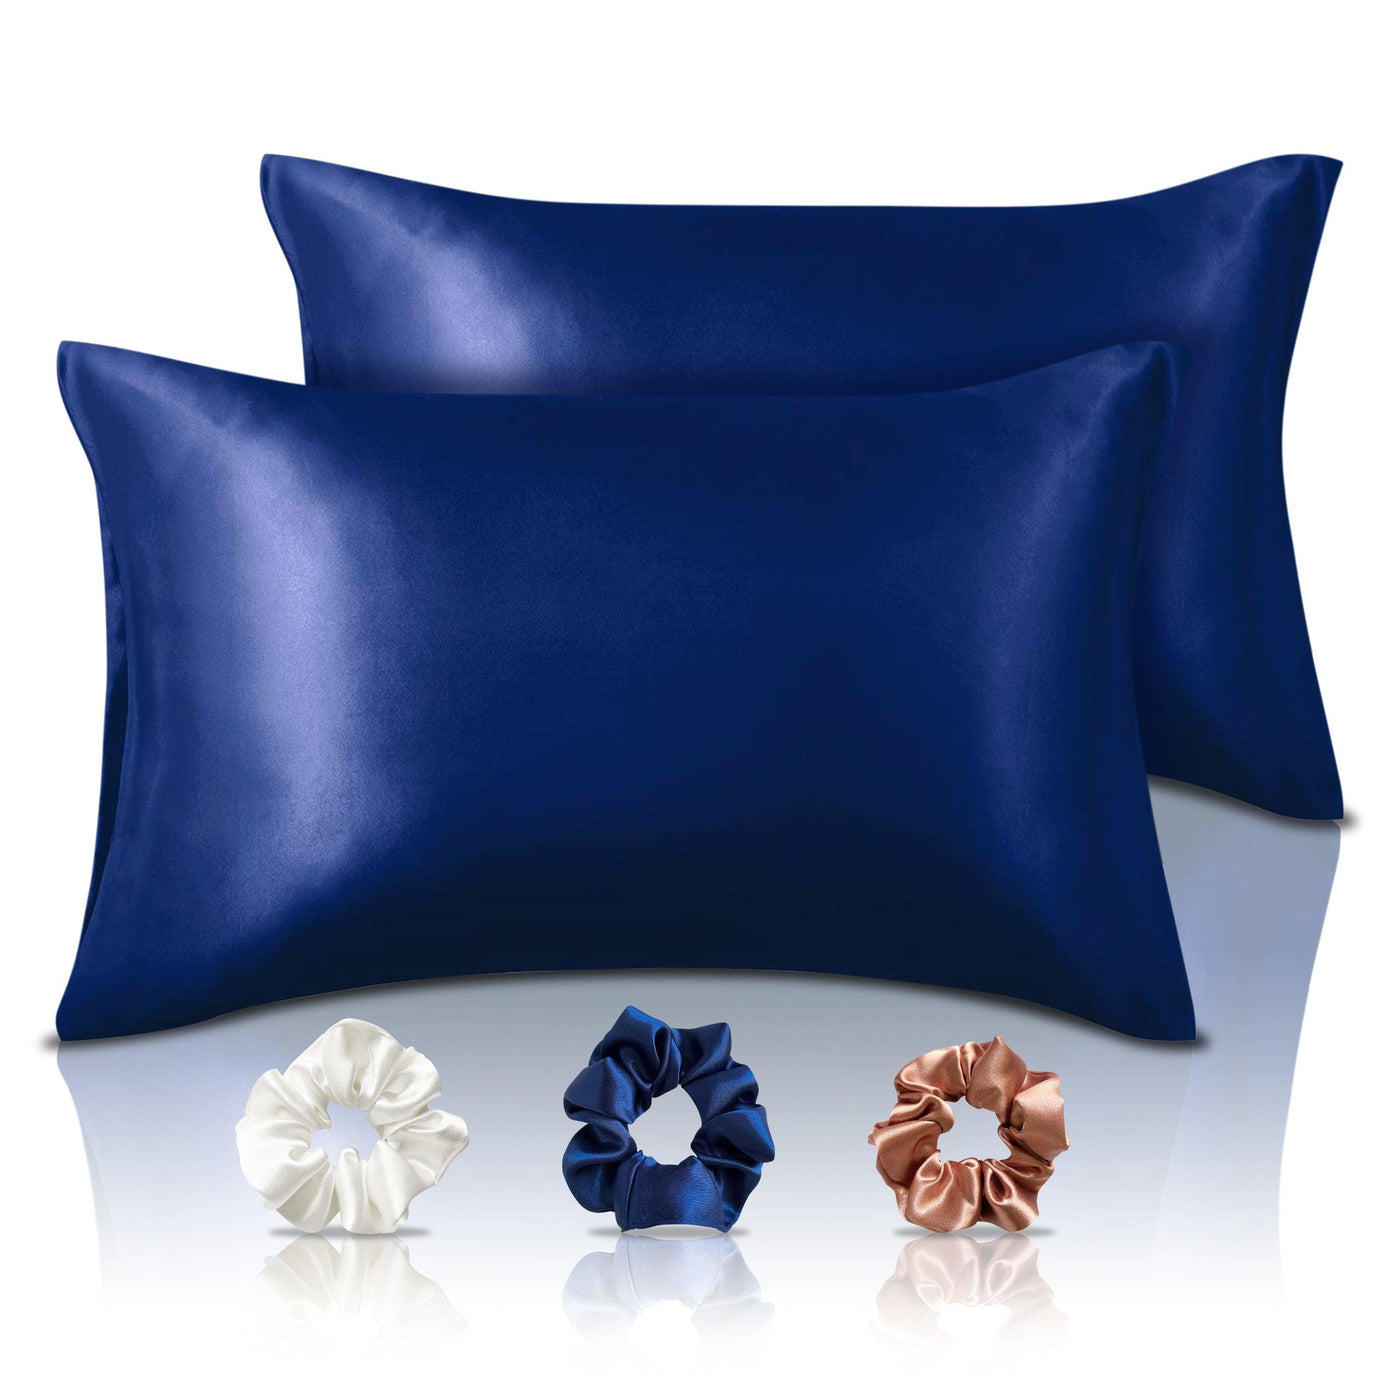 Luxury Satin Pillowcases - 18 x 27 inches | Pack of 2 Pillowcases + 3 Scrunchies | Navy Blue - silvrbear